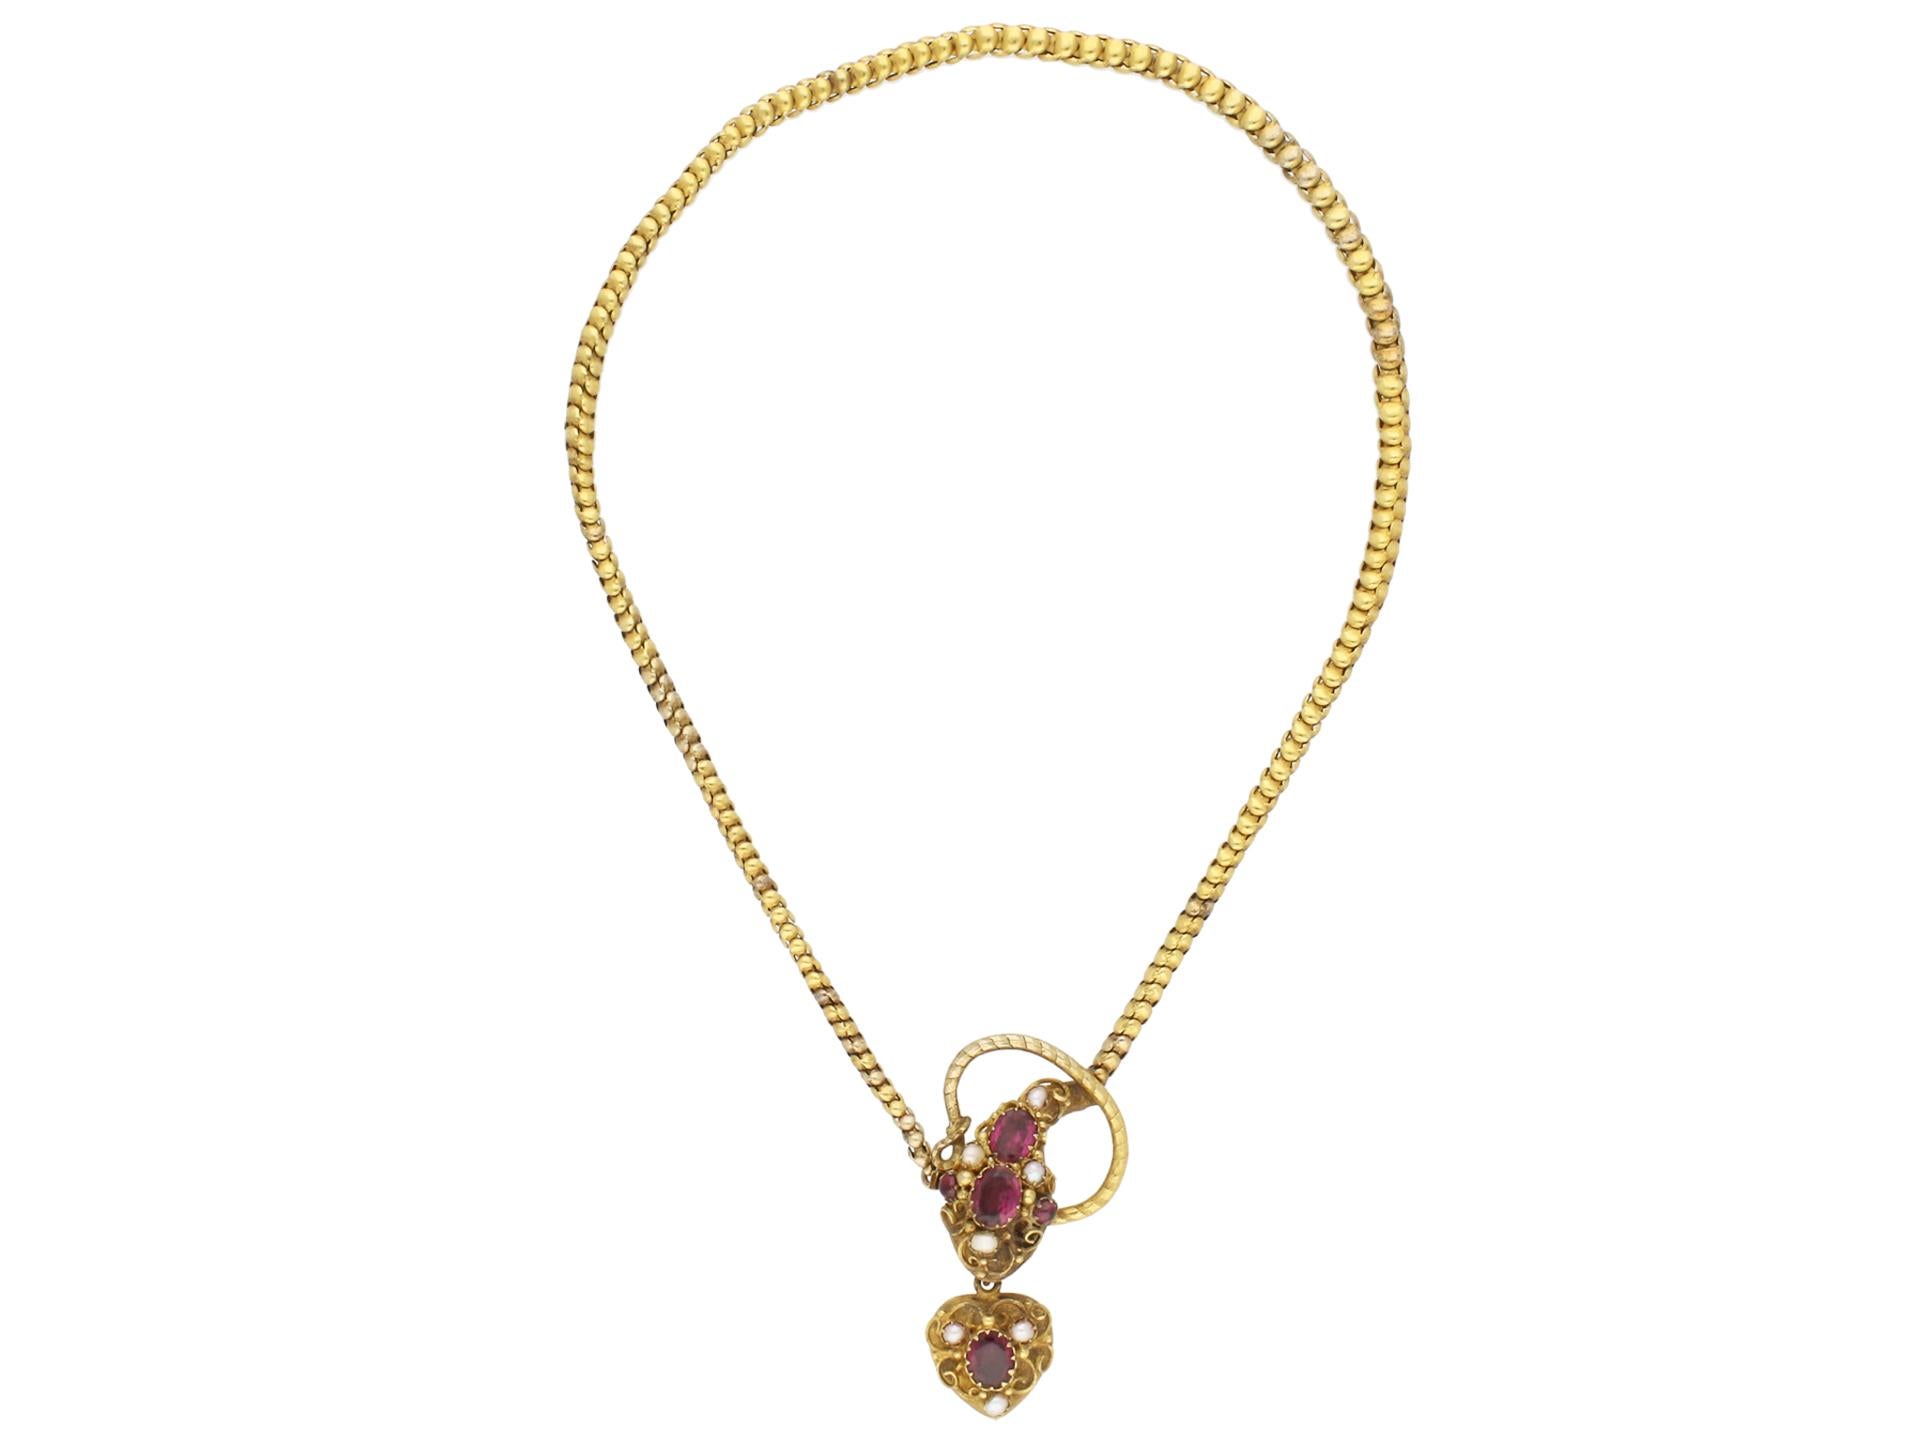 Antique garnet and pearl set snake necklace. Set with three oval old cut garnets in closed back claw settings with a combined weight of 4.00 carats, flanked by two round cabochon garnets to centre with a combined weight of 0.40 carats in claw